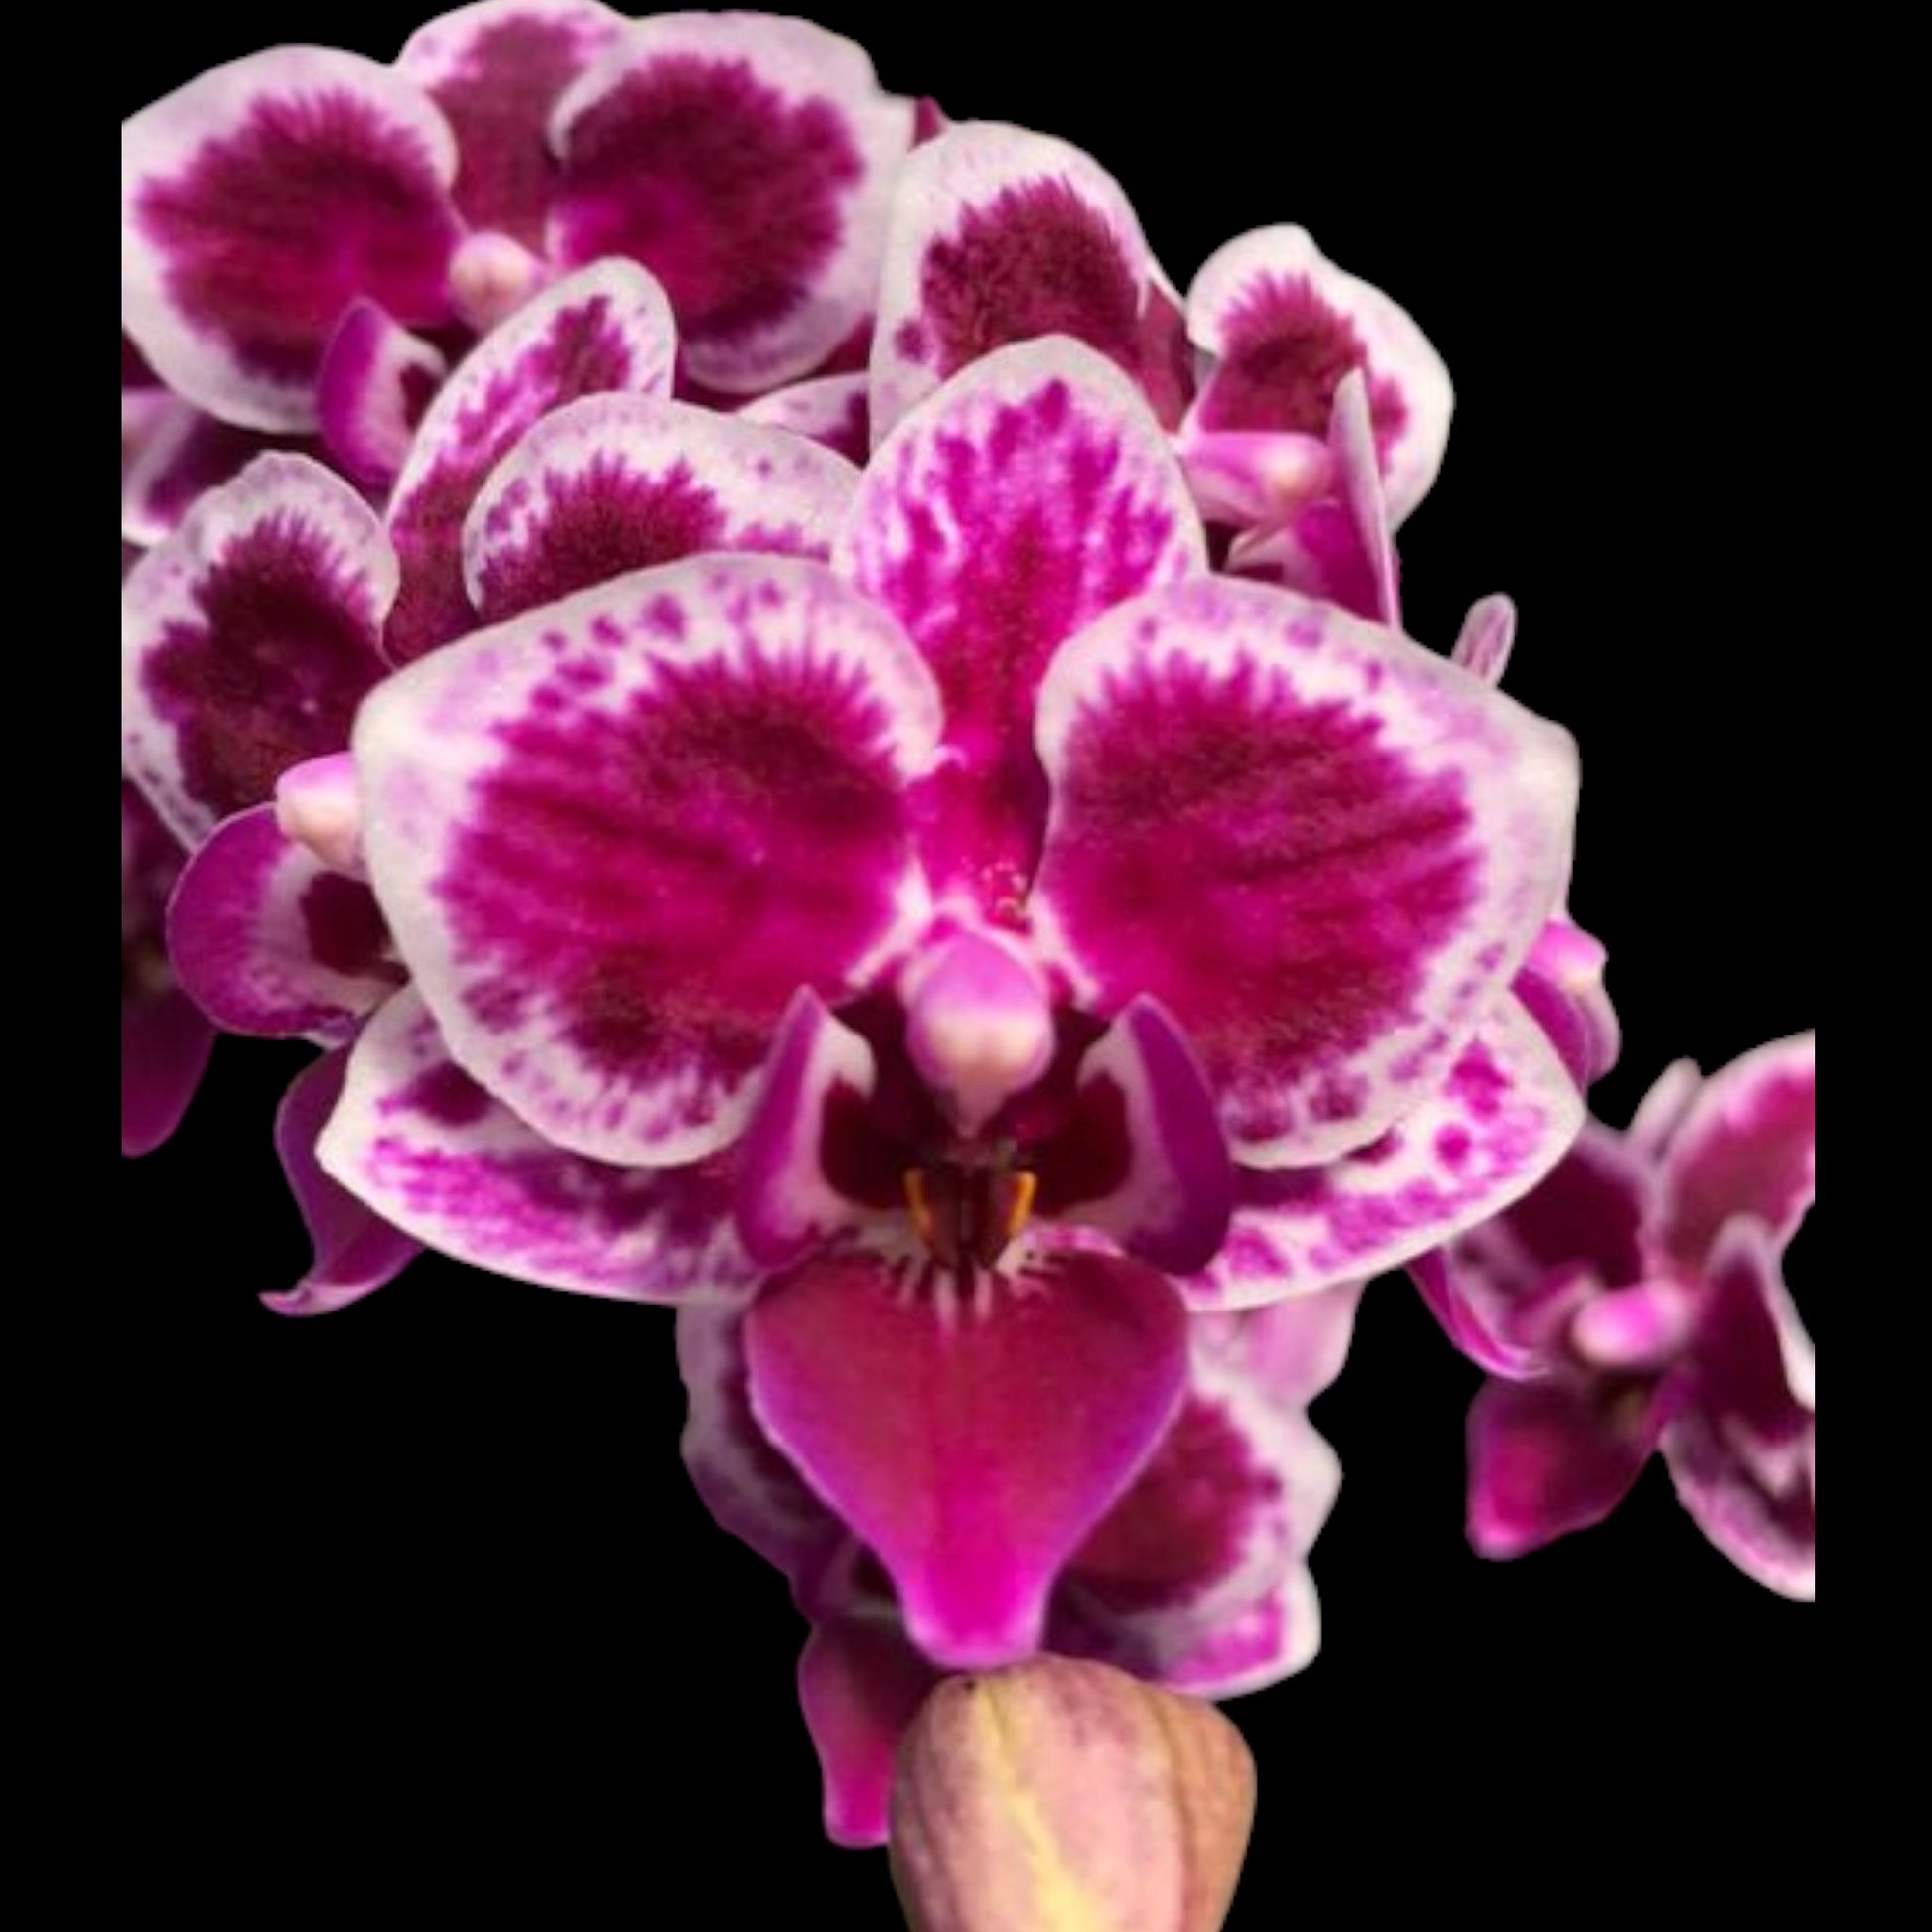 Phal. Prince Louis - Dr. Bill's Orchids, LLC